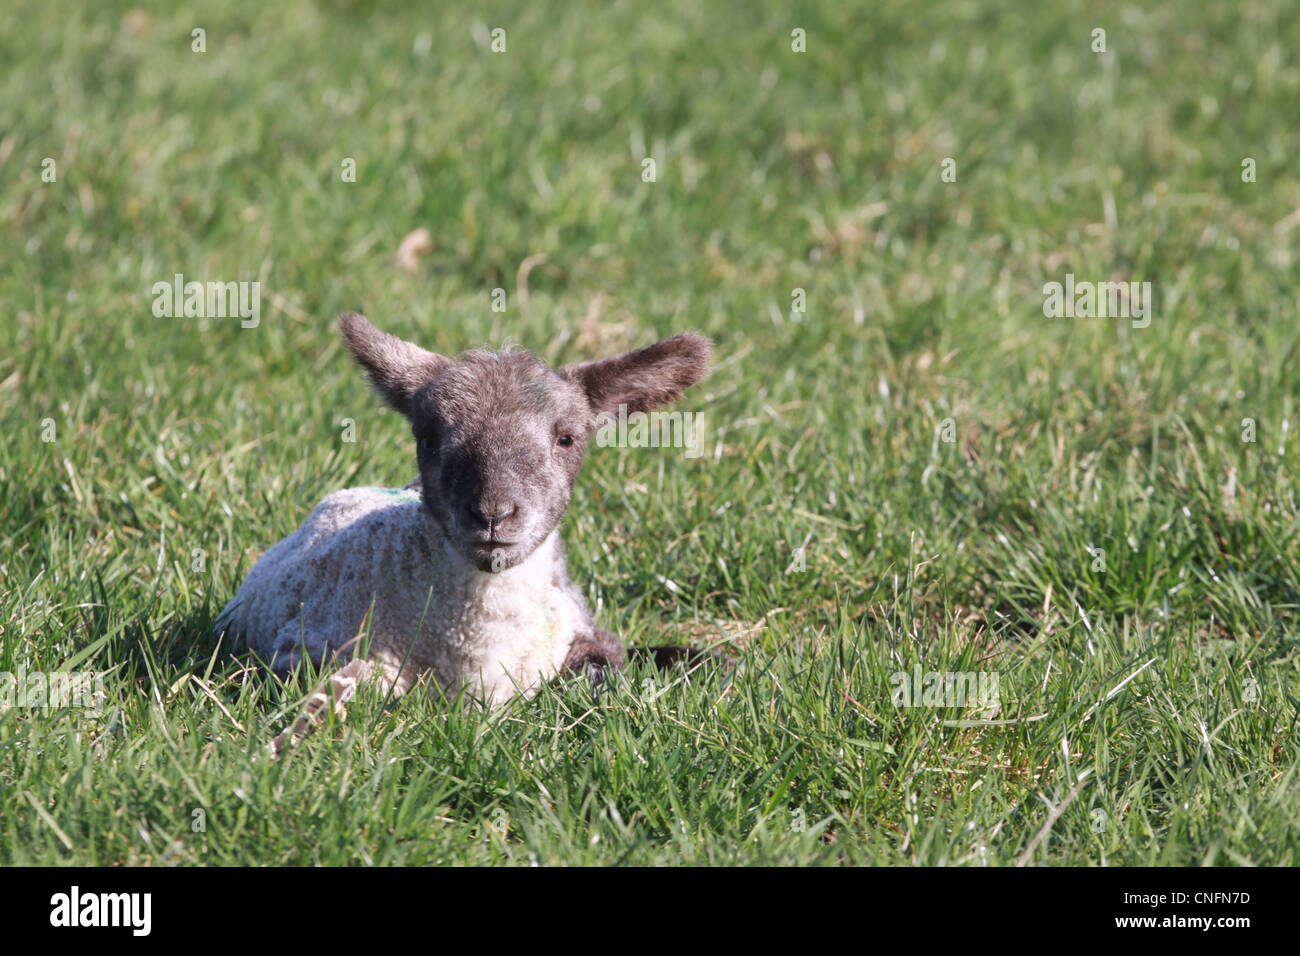 Young lamb lying on floor of green grass Stock Photo